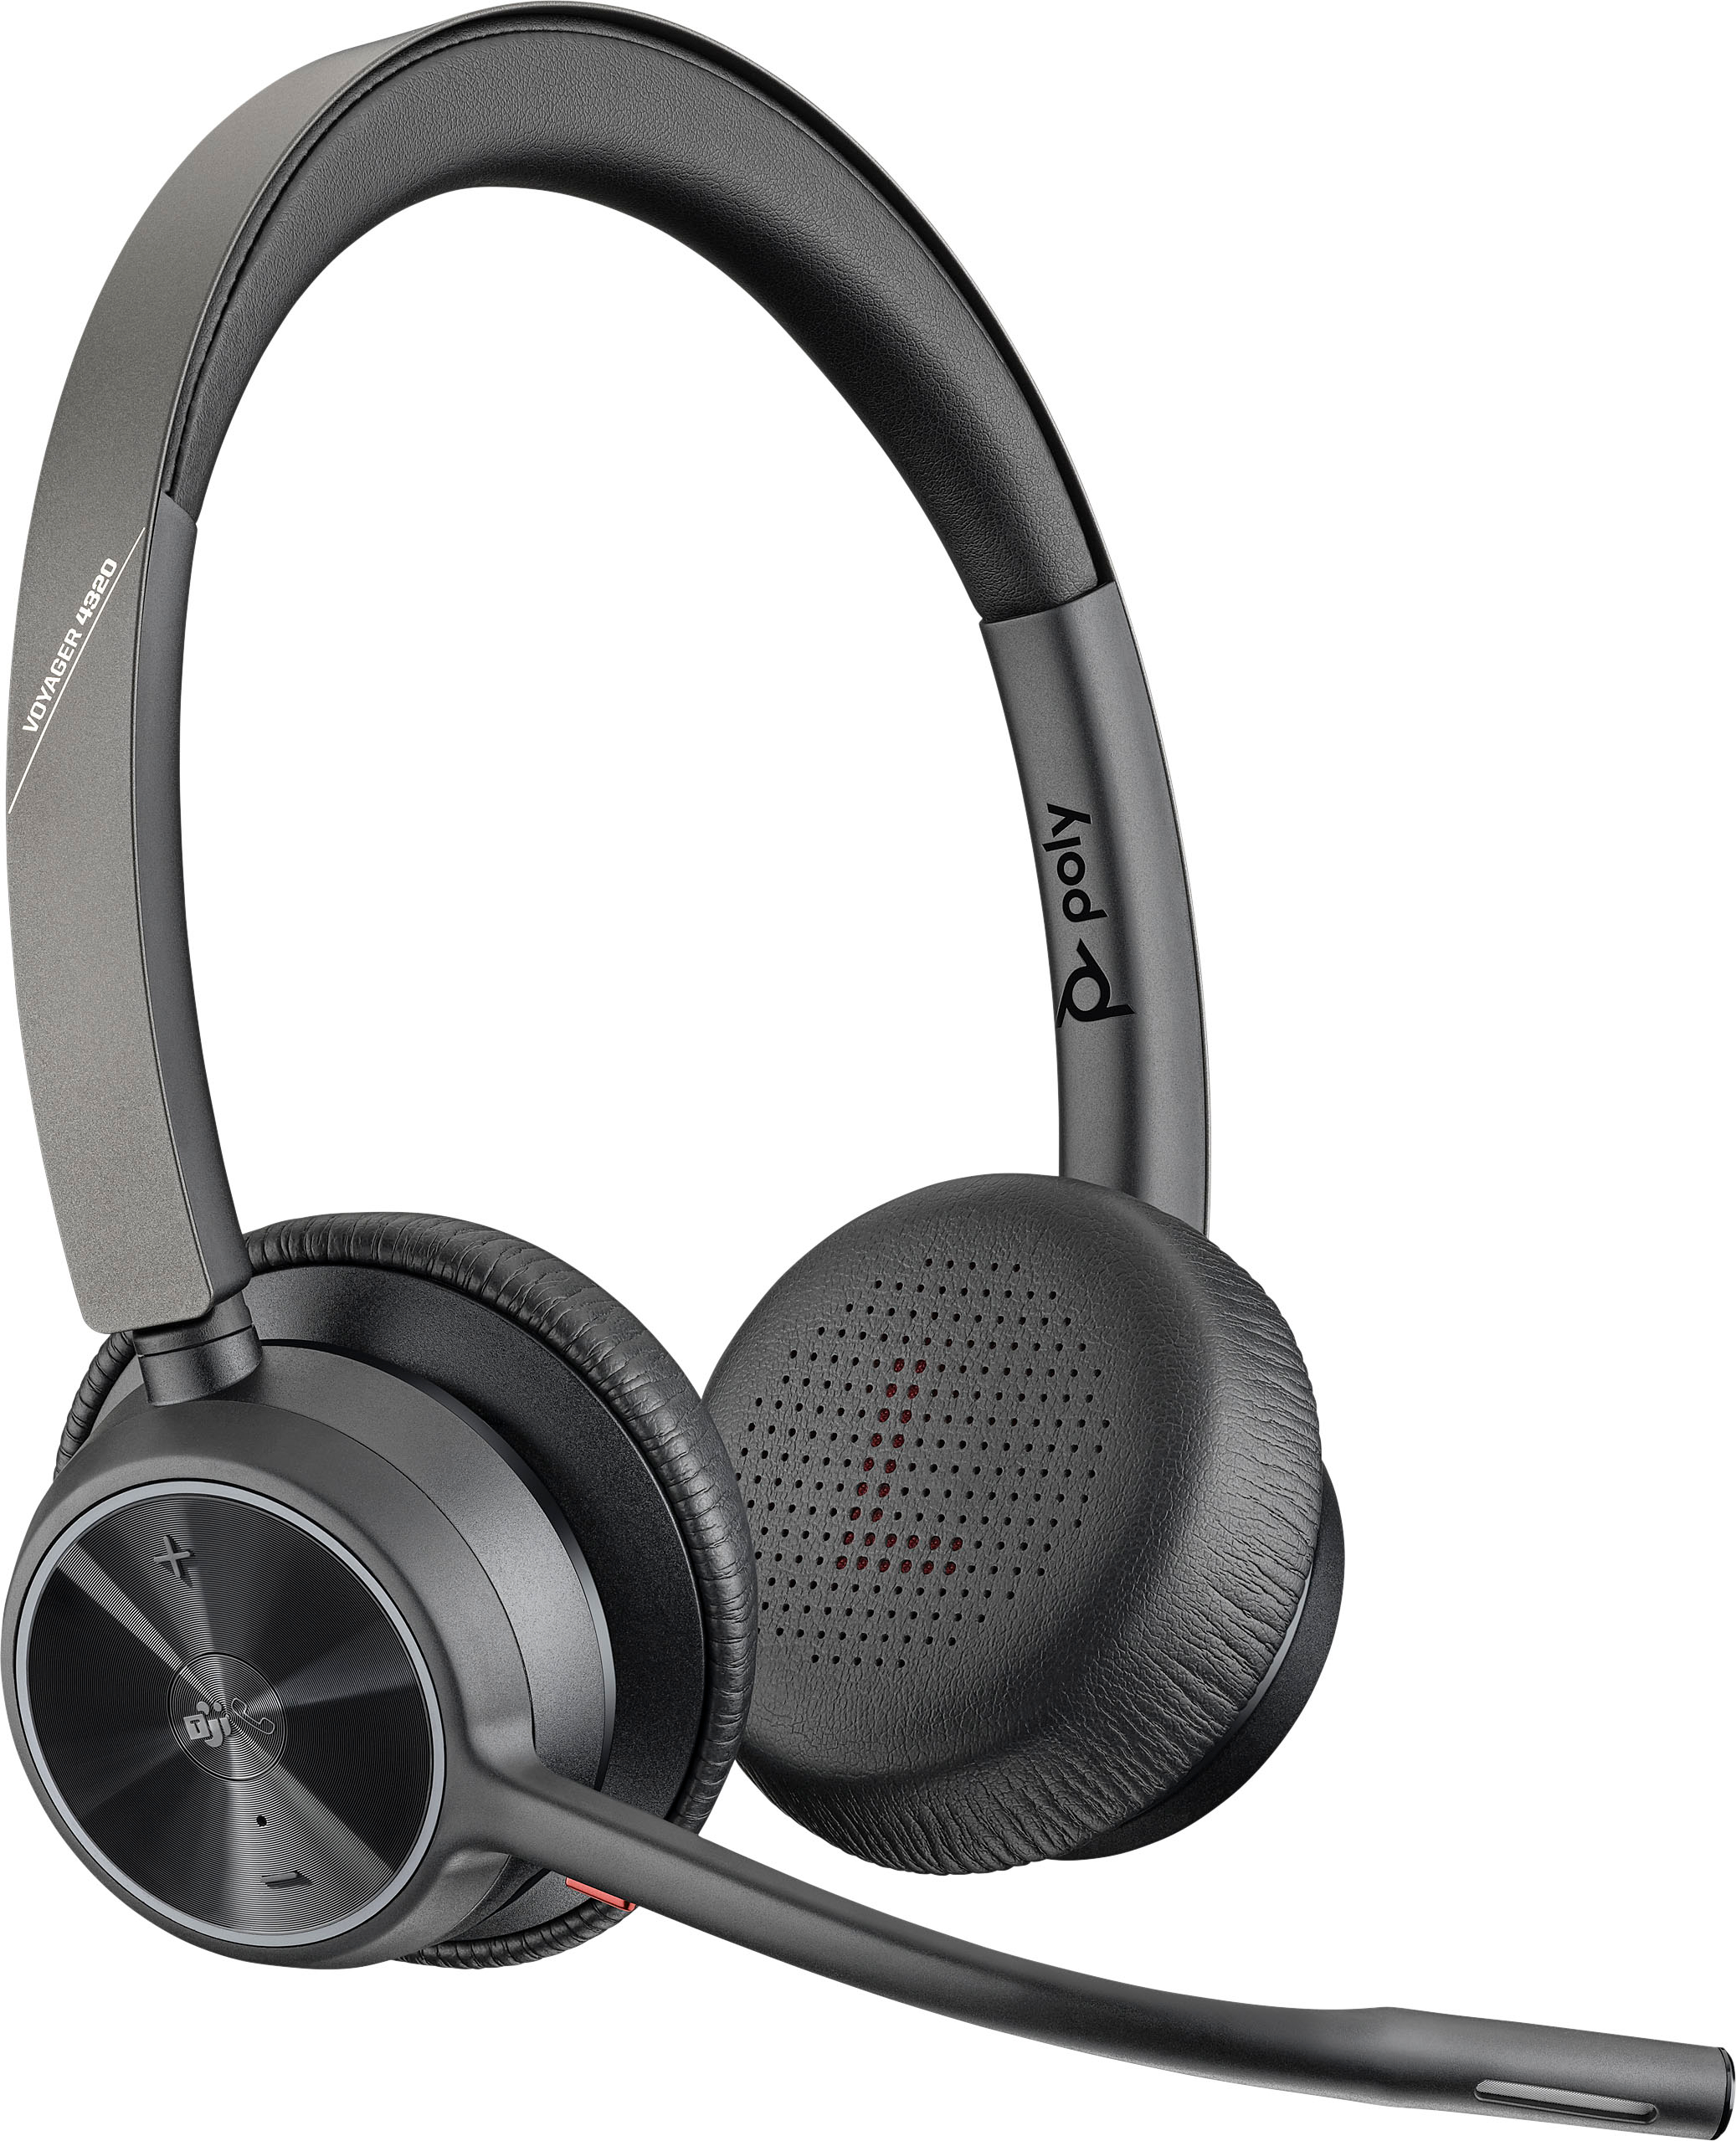 Angle View: Poly - formerly Plantronics - Voyager 4320 Wireless Noise Cancelling Stereo Headset with mic - Black